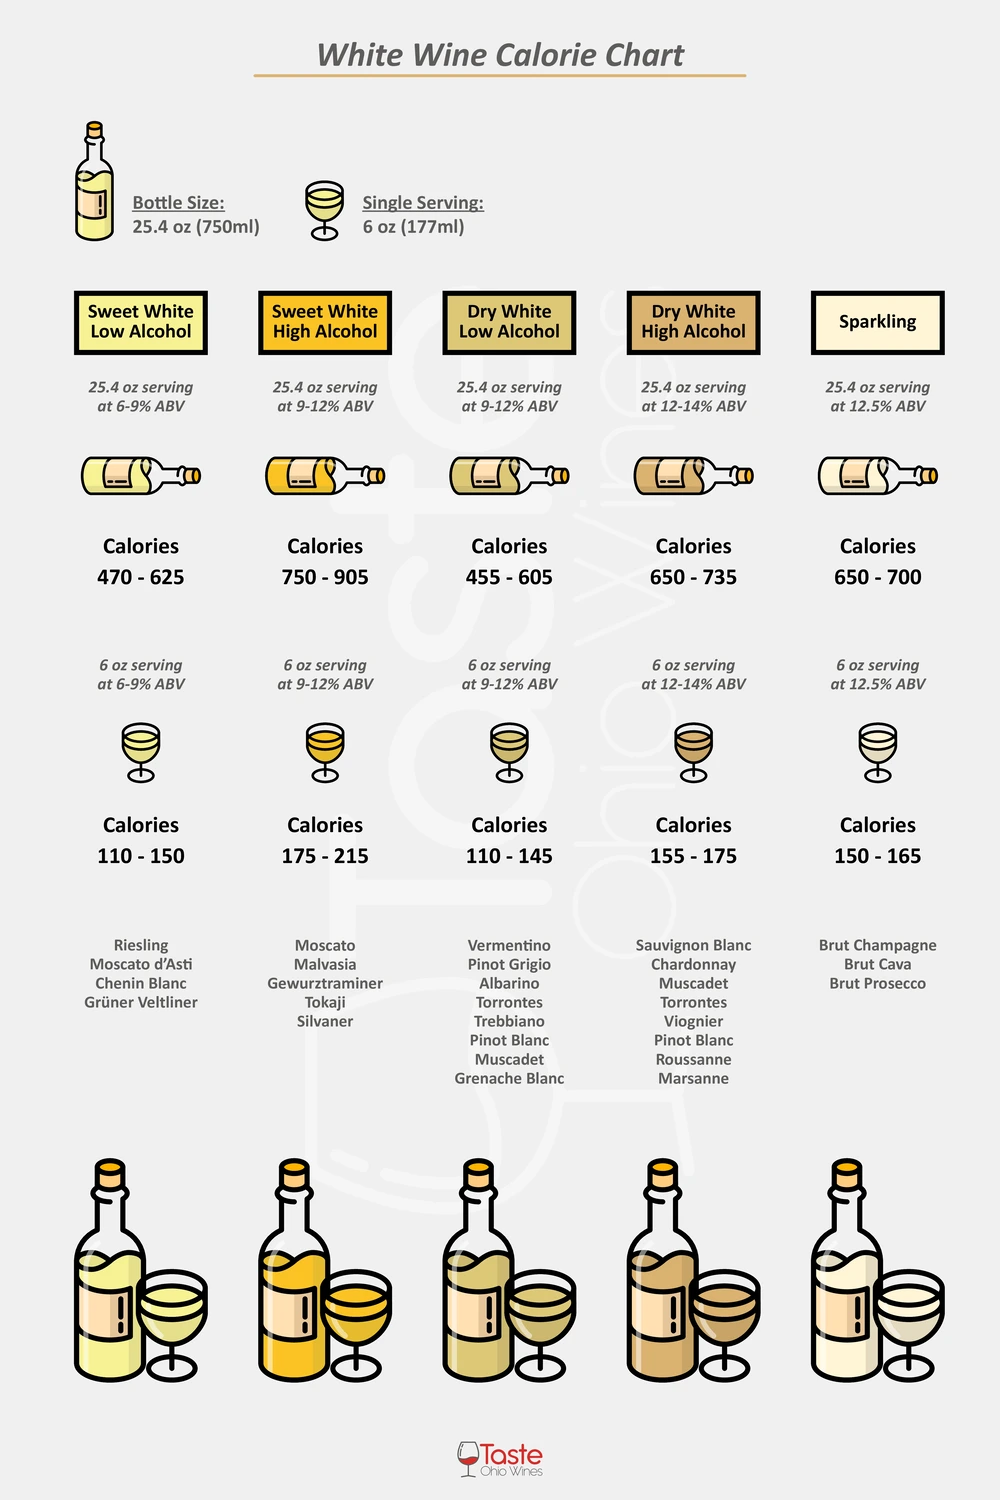 How Many Calories Are In A Bottle Of White Wine Chart Infographic